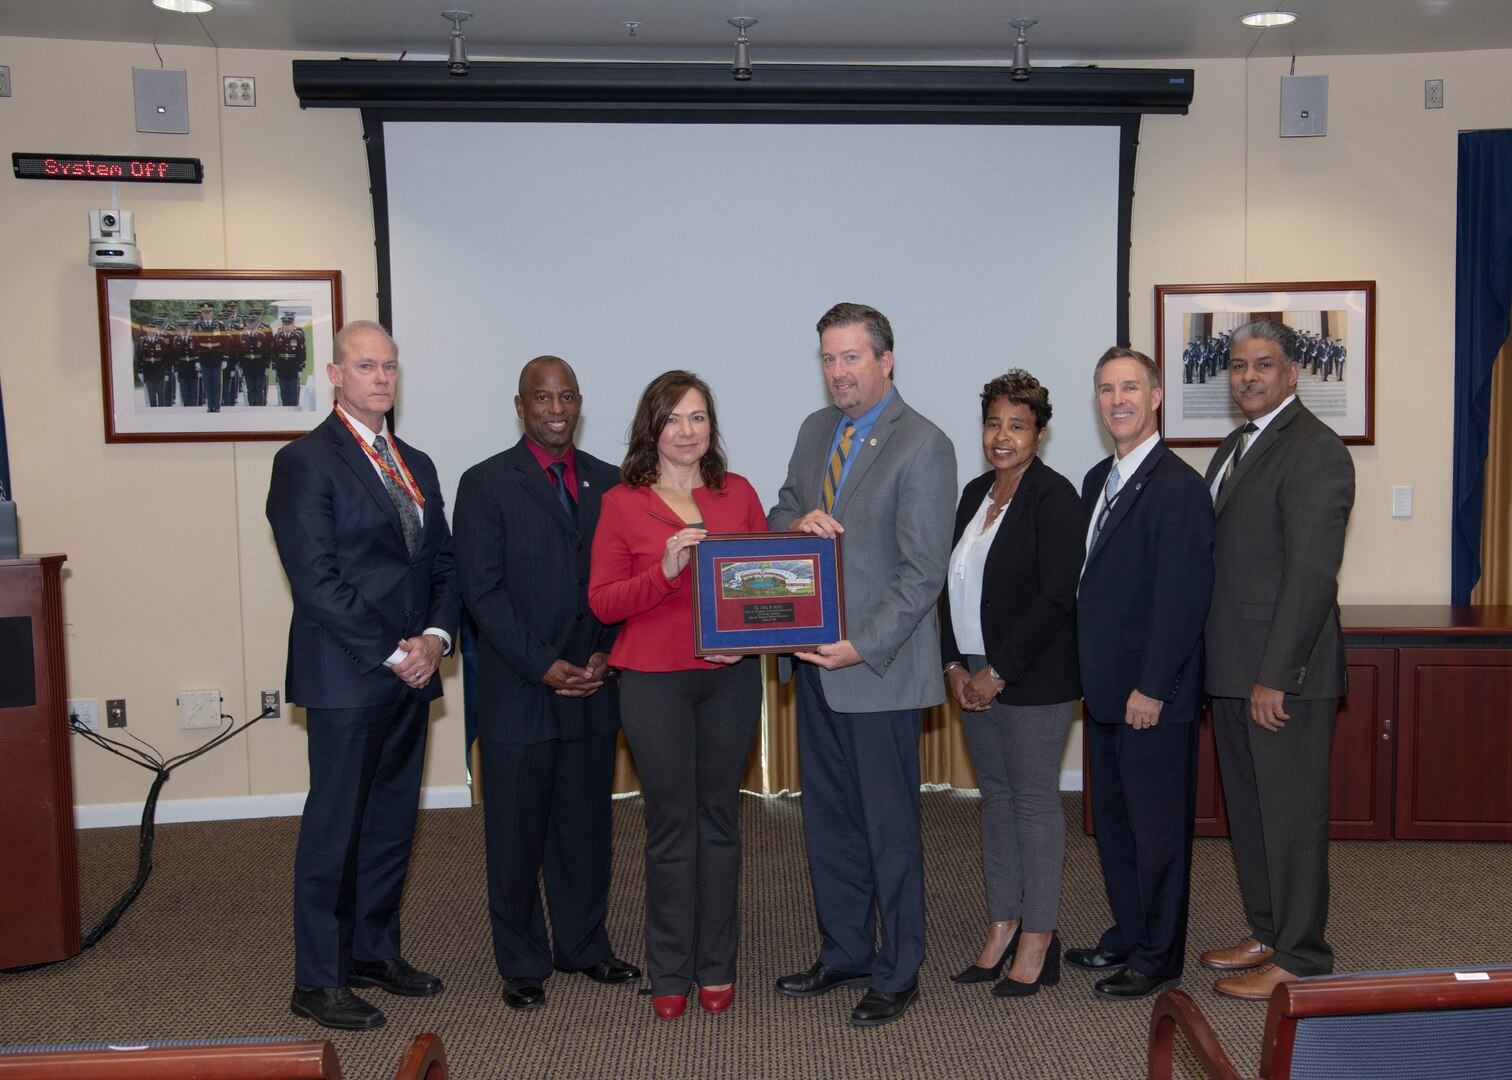 Five men and two women pose with a plaque after the HQC Hispanic Heritage Month observance.